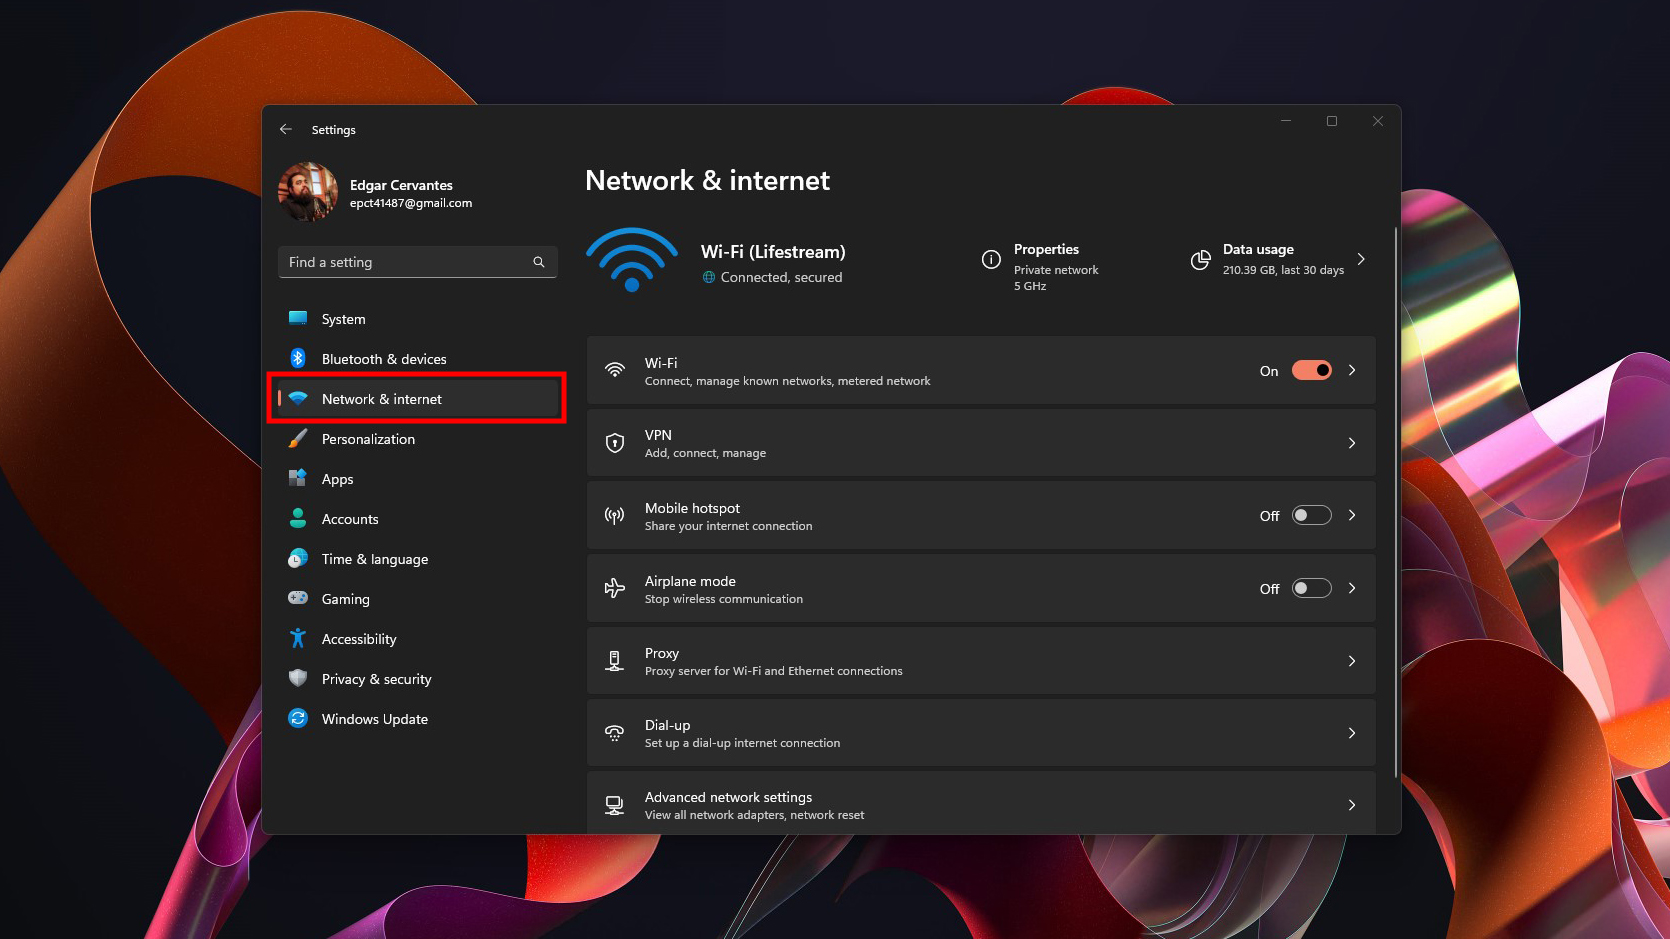 Network and internet settings in Windows